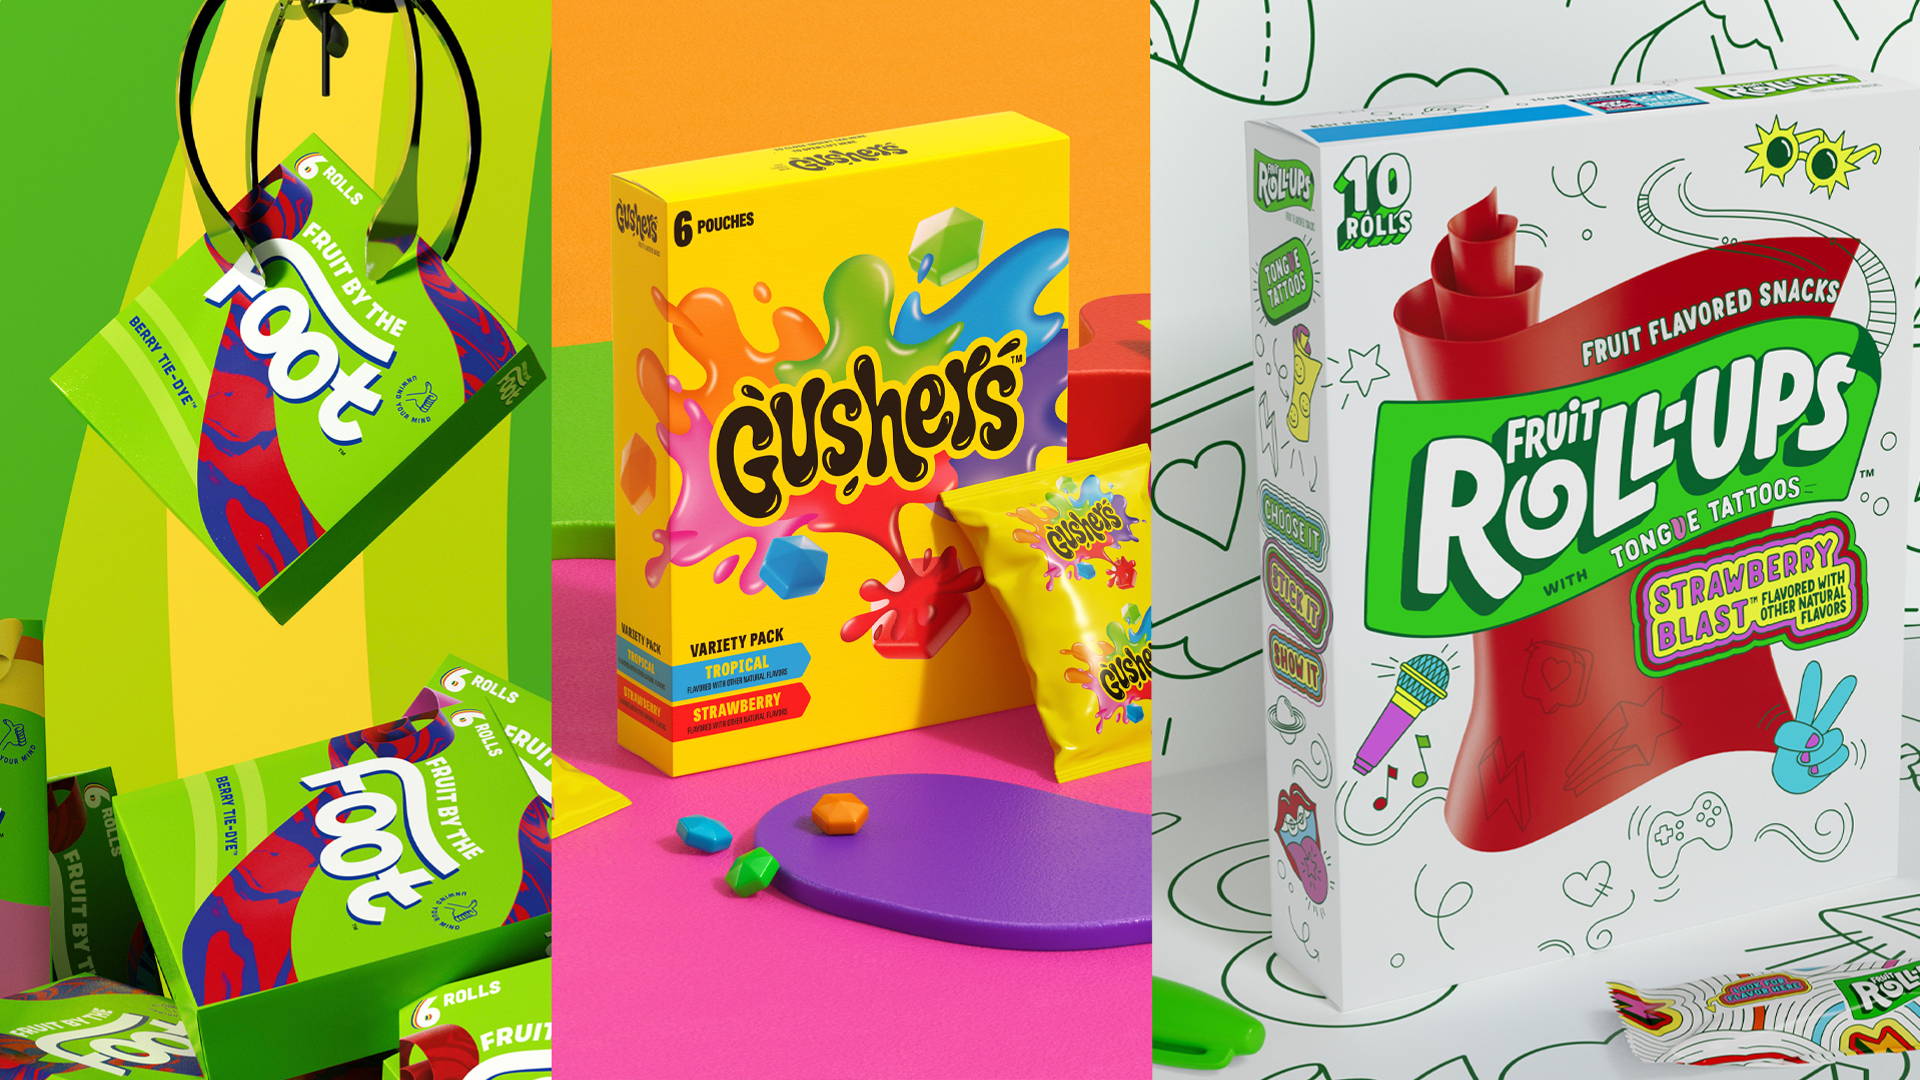 Fruit By The Foot, Gushers, and Fruit Roll-Ups Get a Modernized Look Courtesy of Pearlfisher | Dieline - Design, Branding & Packaging Inspiration